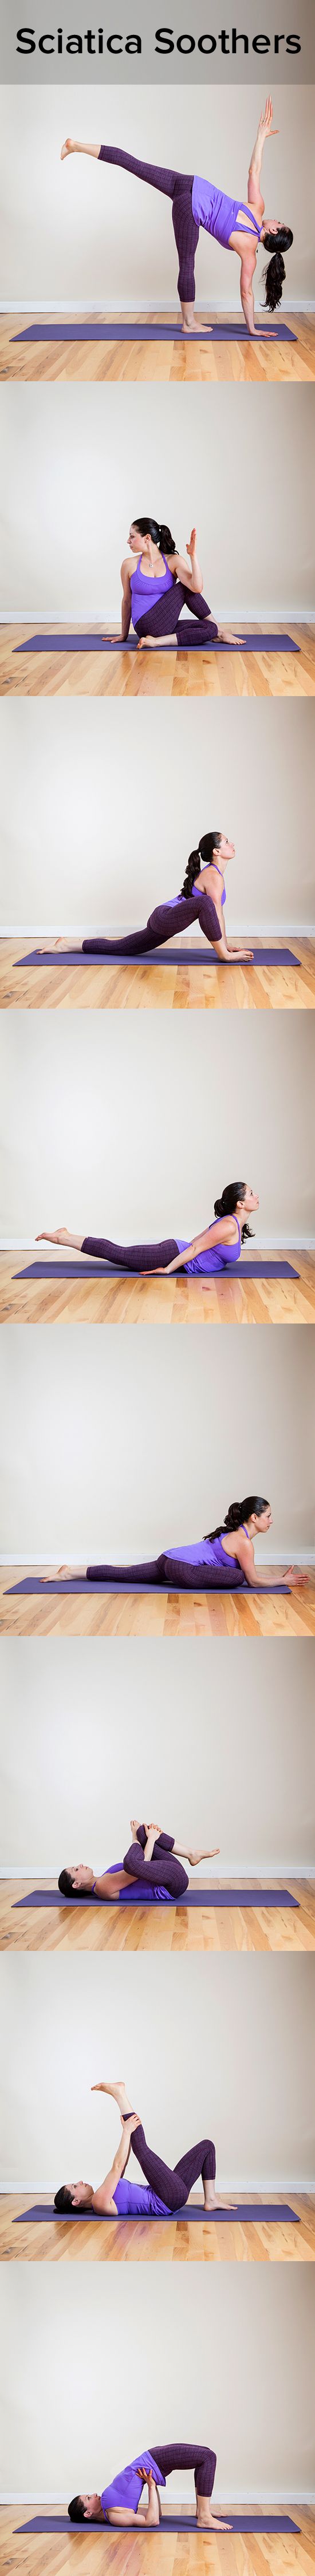 Yoga for Sciatica: 10 Poses for a Holistic Approach to Pain Relief |  PINKVILLA